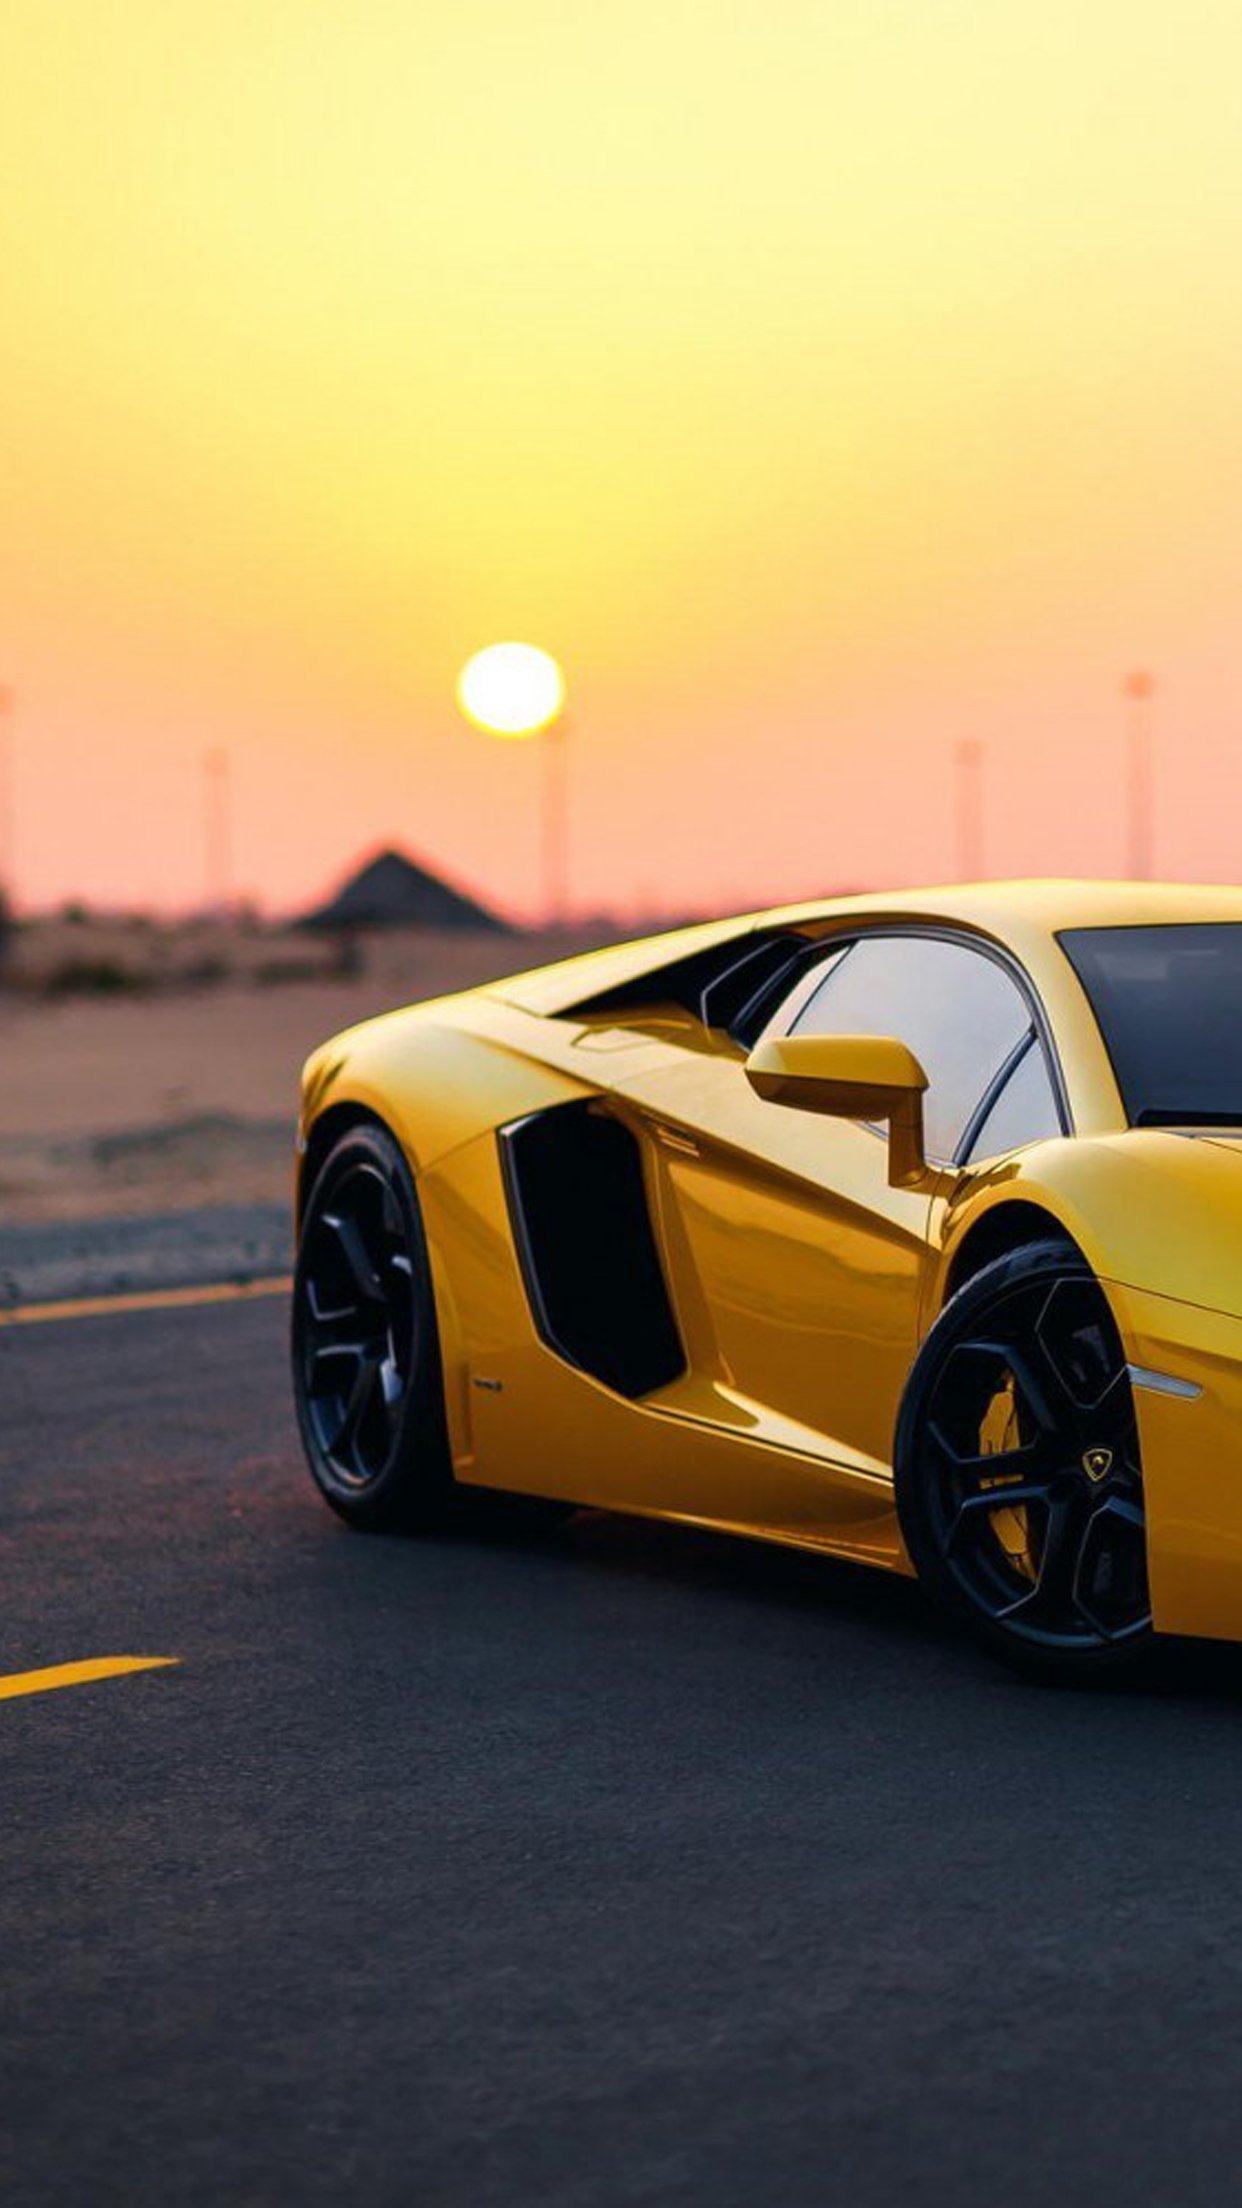 Supercar wallpapers for iPhone